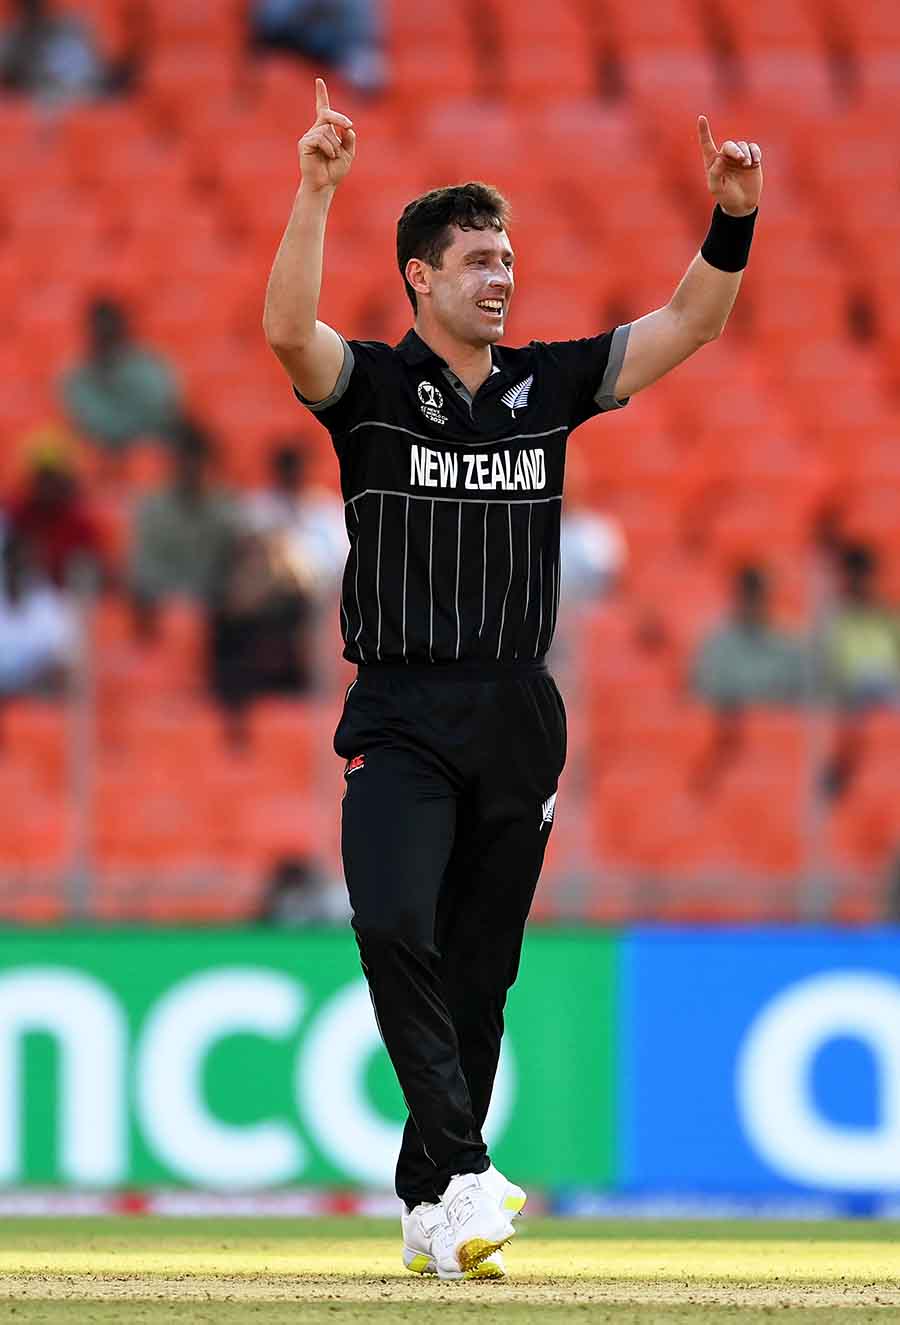 Matt Henry (New Zealand): With so much of the attention going to Tim Southee and Trent Boult in the New Zealand attack, Henry often goes under the radar. Not that it affects his performances, which were exactly what the Kiwis needed against England and the Netherlands. By getting the breakthrough of Dawid Malan in Ahmedabad, Henry picked up the first wicket of this World Cup, before adding the prized scalps of Jos Buttler and Sam Curran on the same day. In Hyderabad, he was equally consistent, grabbing three more wickets while once again going at under five runs per over